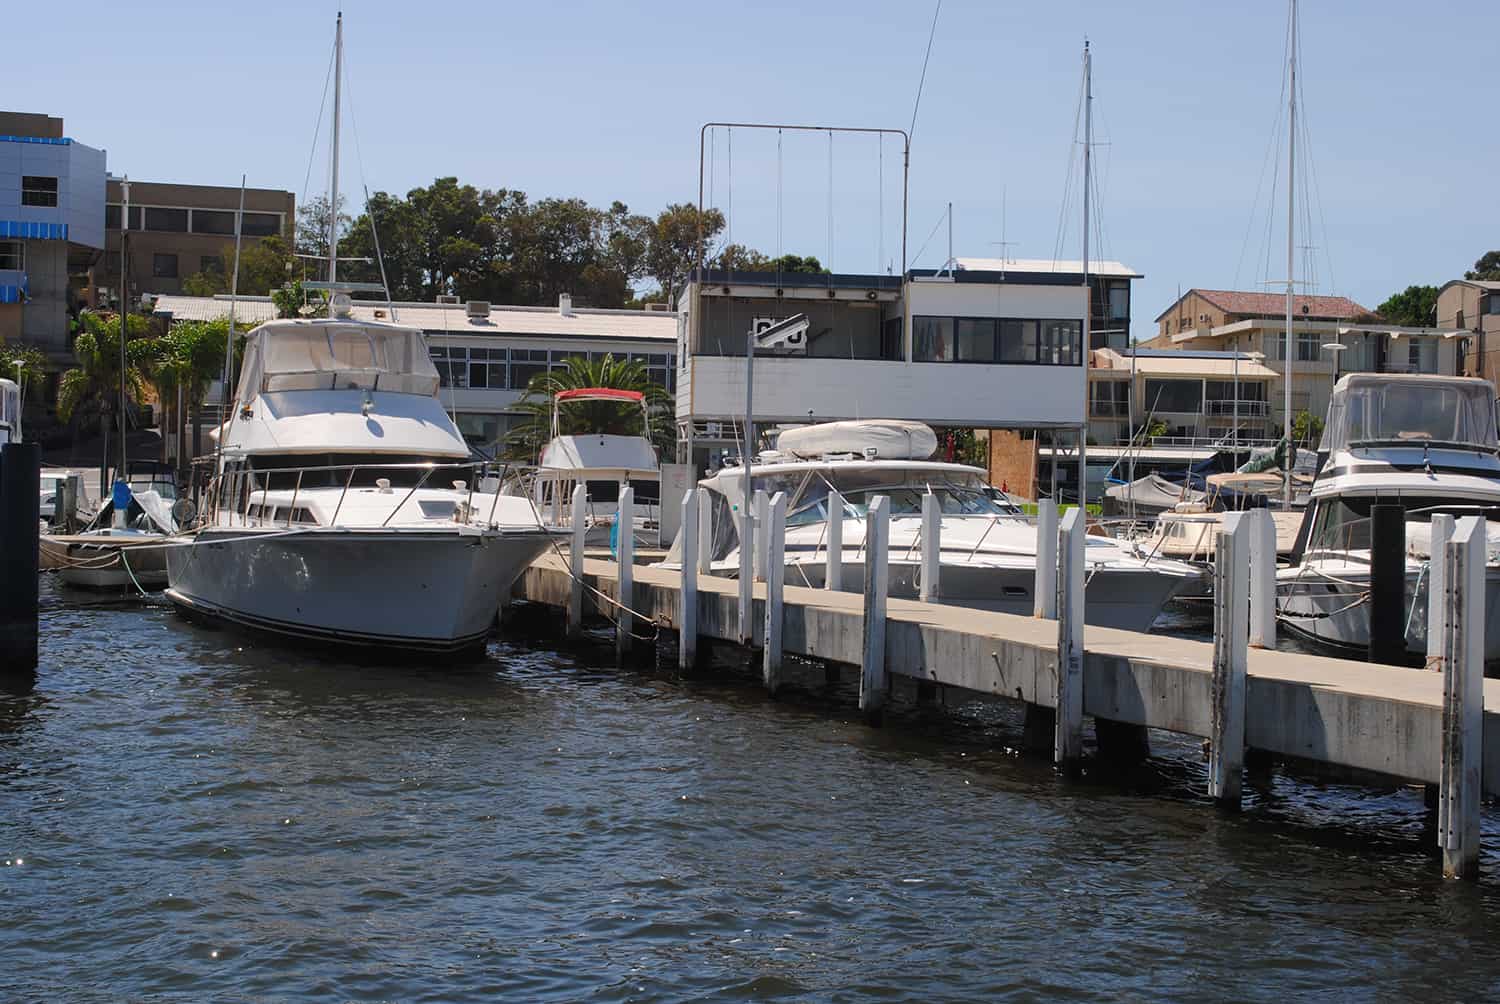 Claremont Yacht Club Jetty with Yachts Moored